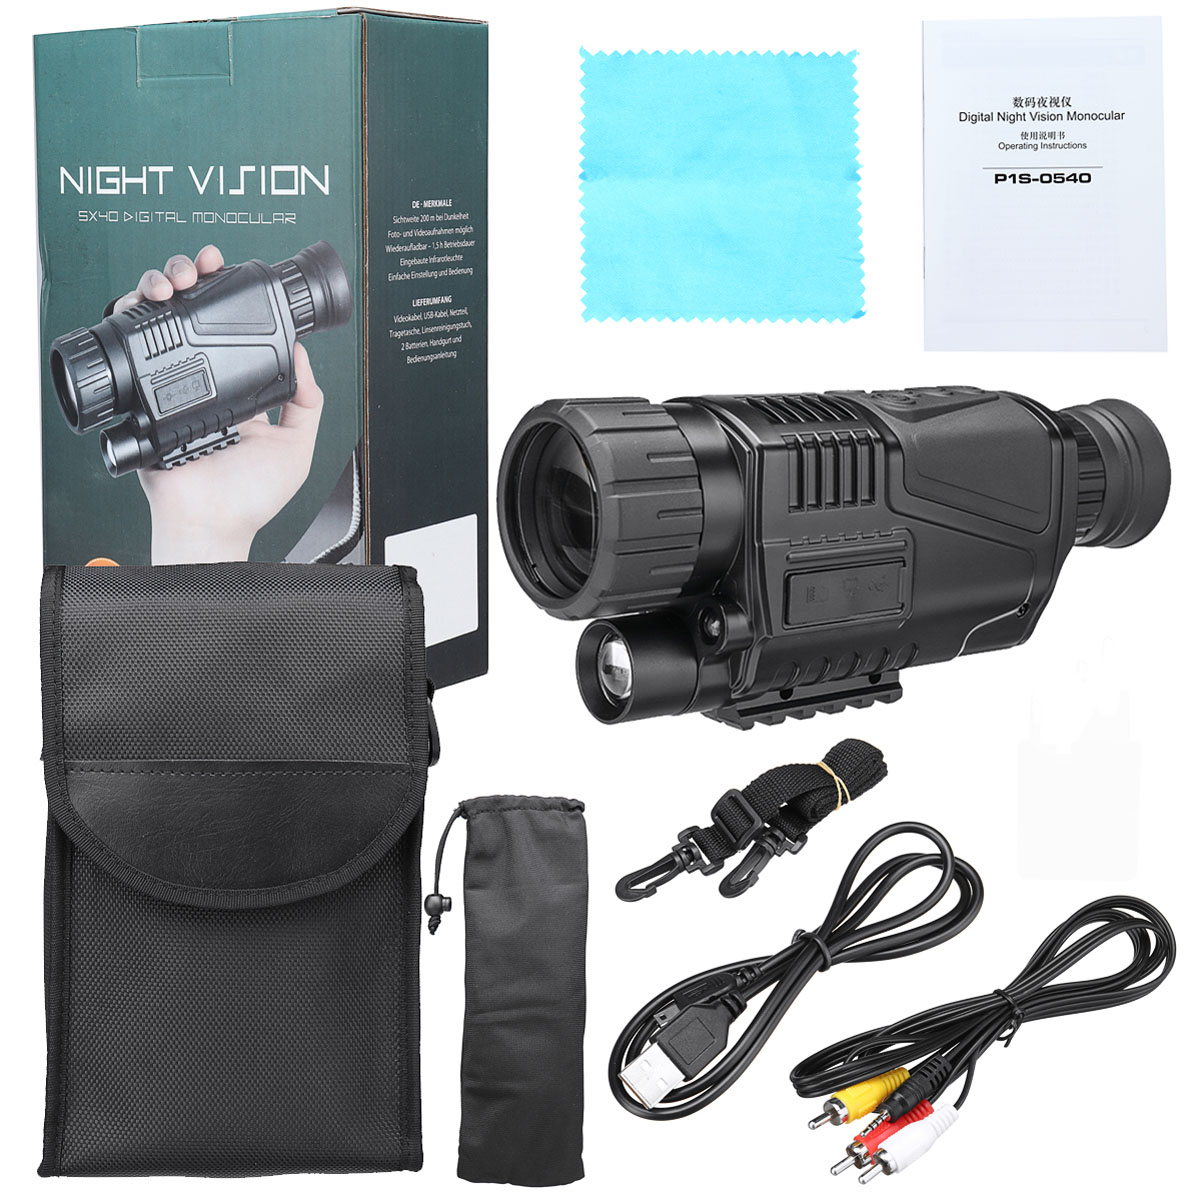 HD-Infrared-Night-Vision-Device-Dual-Use-Monocular-Camera-5X-Digital-Zoom-Telescope-For-Outdoor-Trav-1935073-9